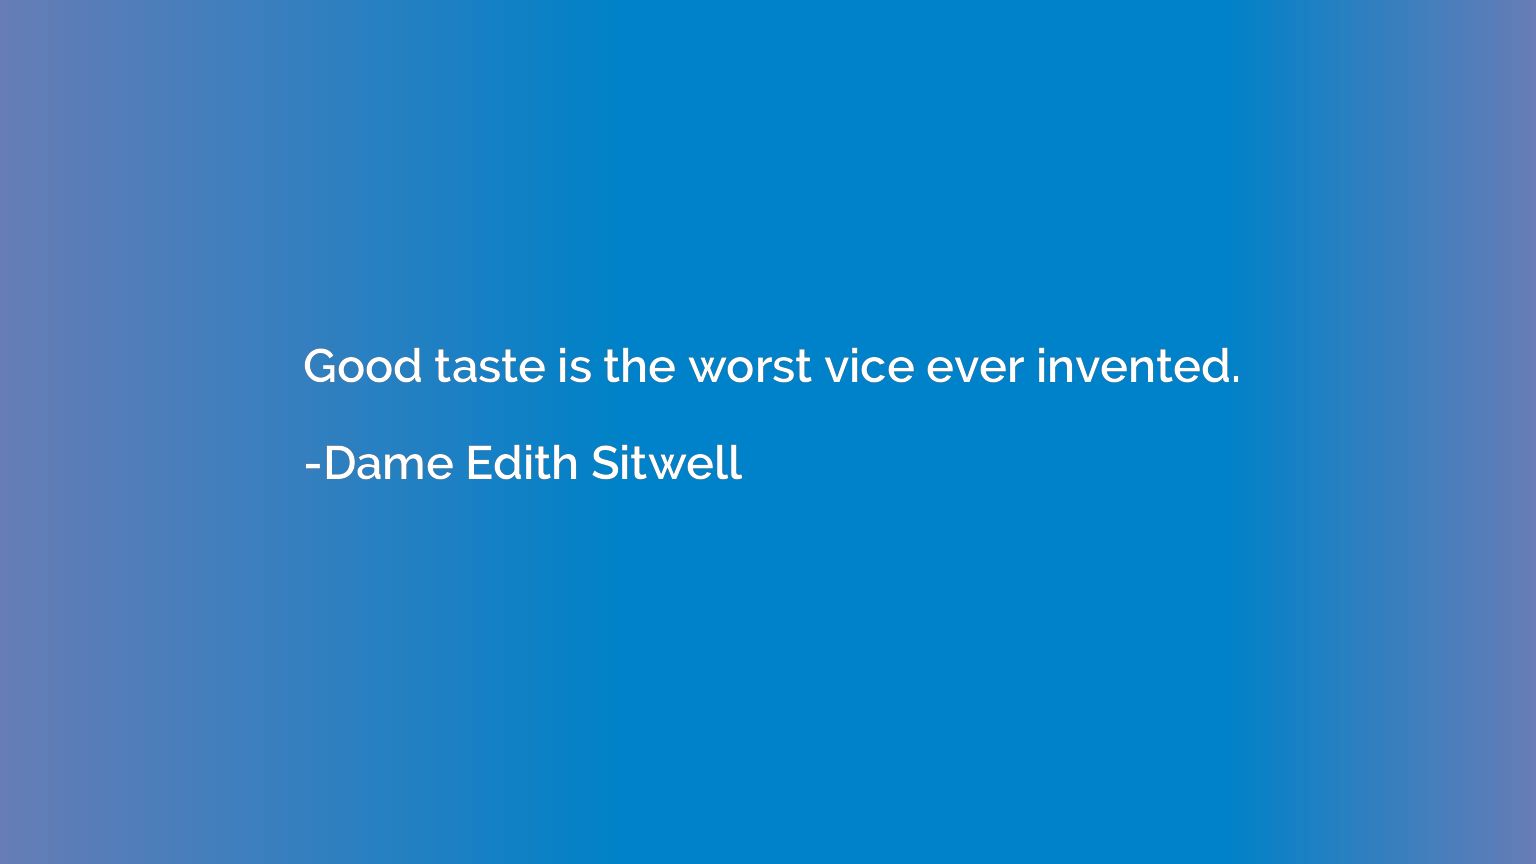 Good taste is the worst vice ever invented.